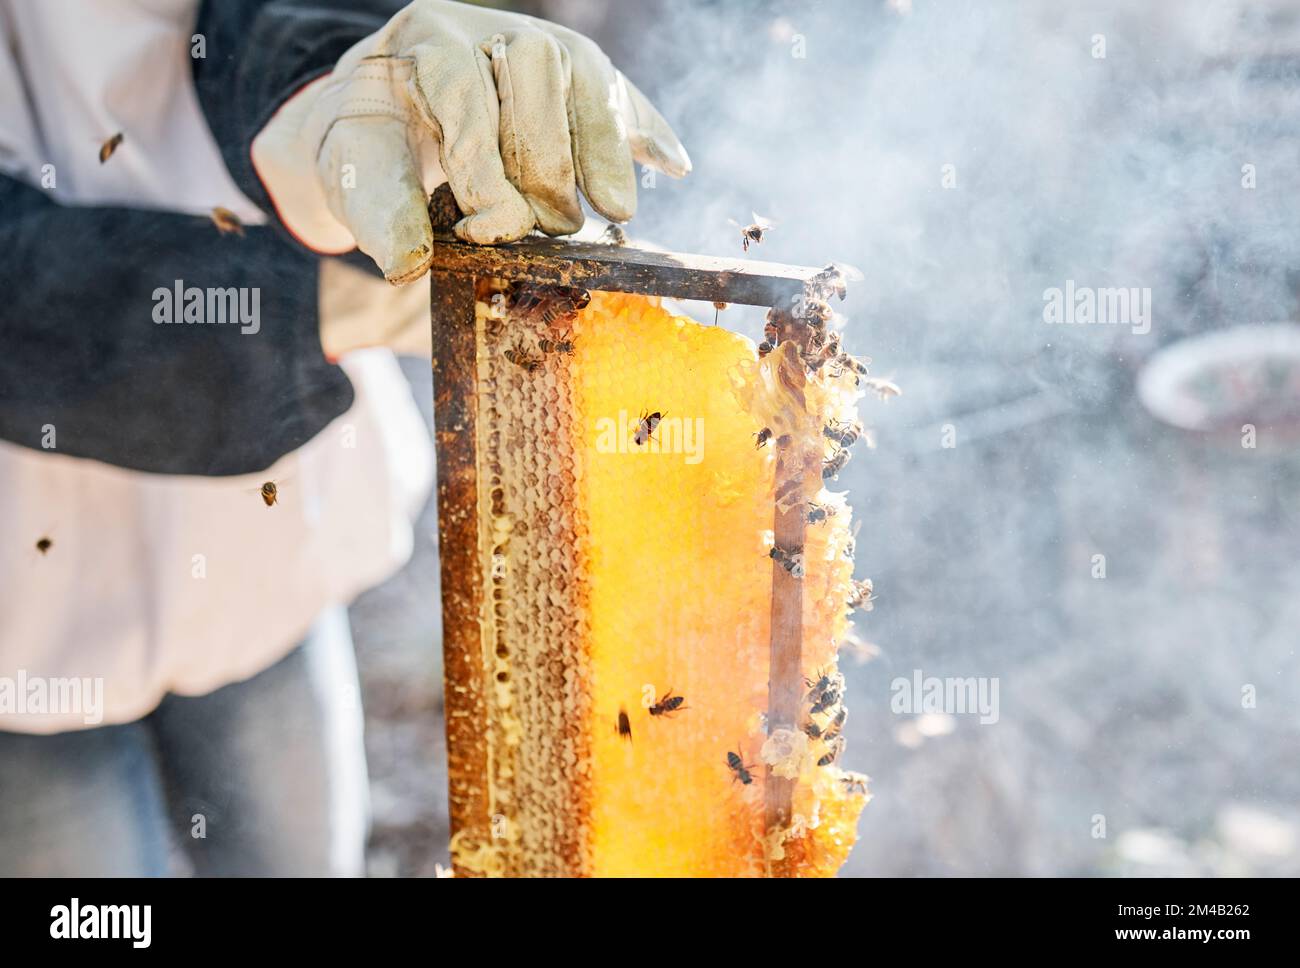 Beekeeper, hands and person with honeycomb frame at farm outdoors. Beekeeping, smoke and owner, employee or worker getting ready to harvest natural Stock Photo